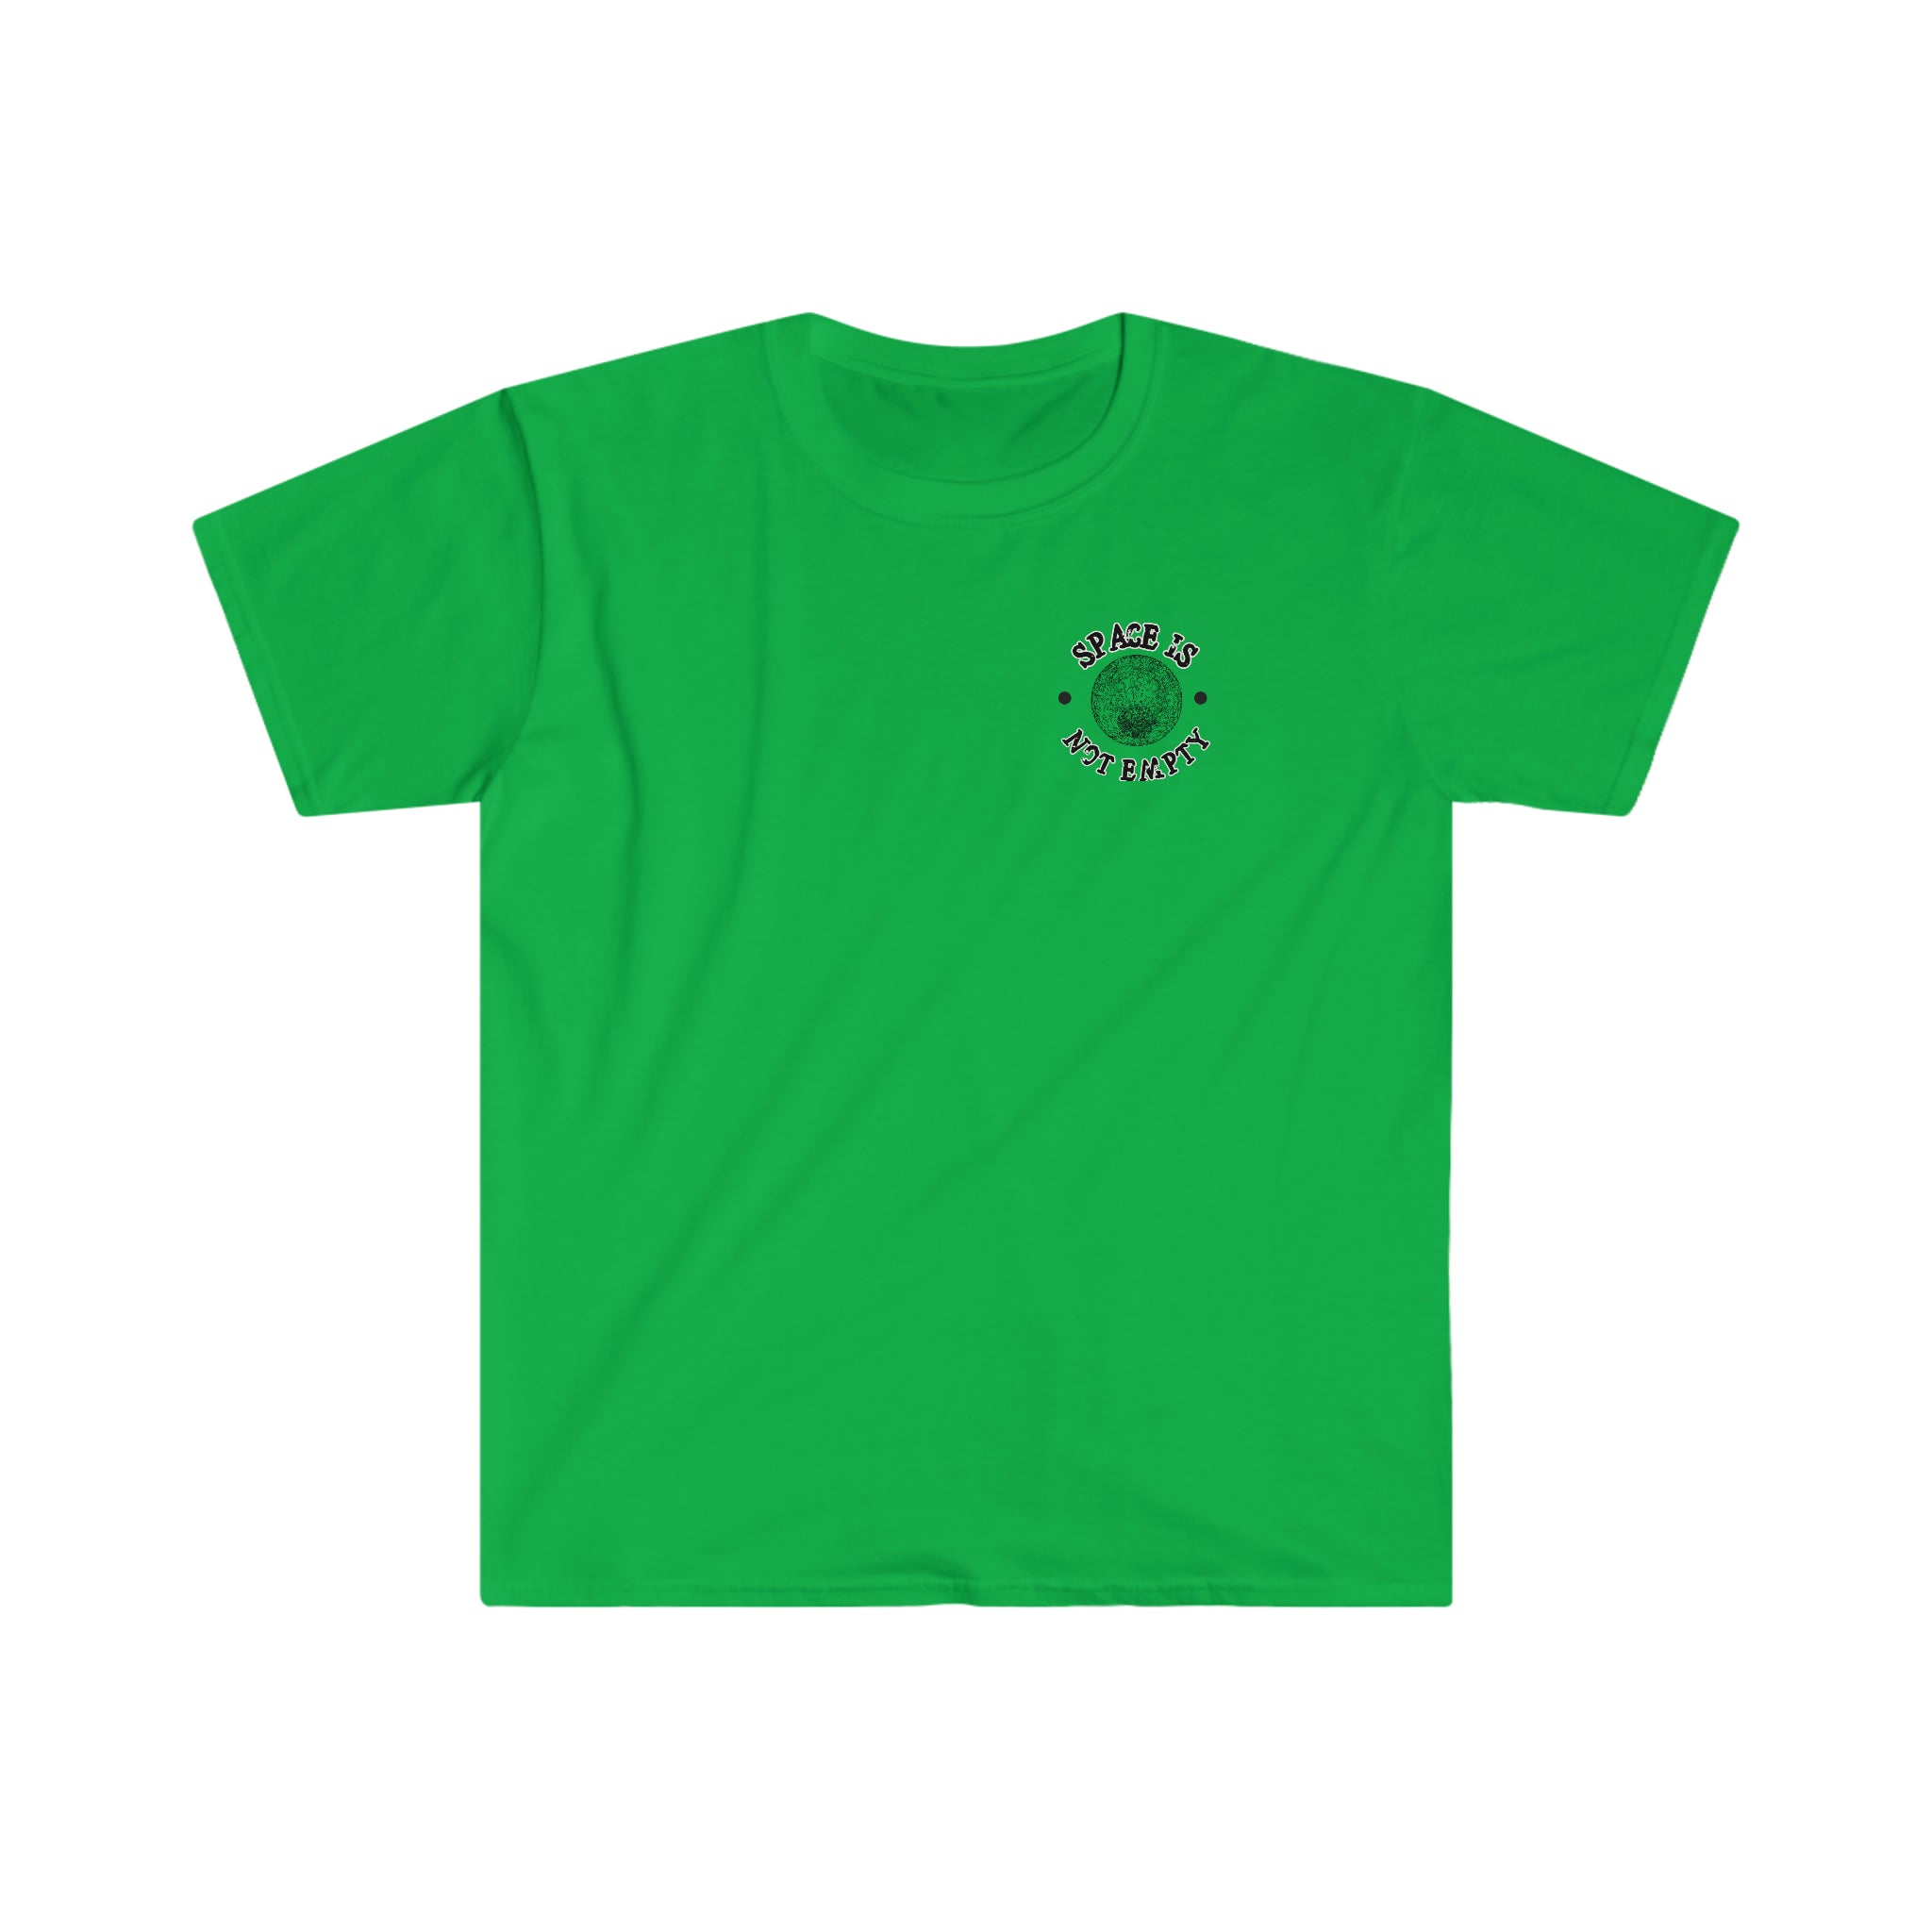 A Save Me From Space T-Shirt with a green flower on it, perfect for a space enthusiast.